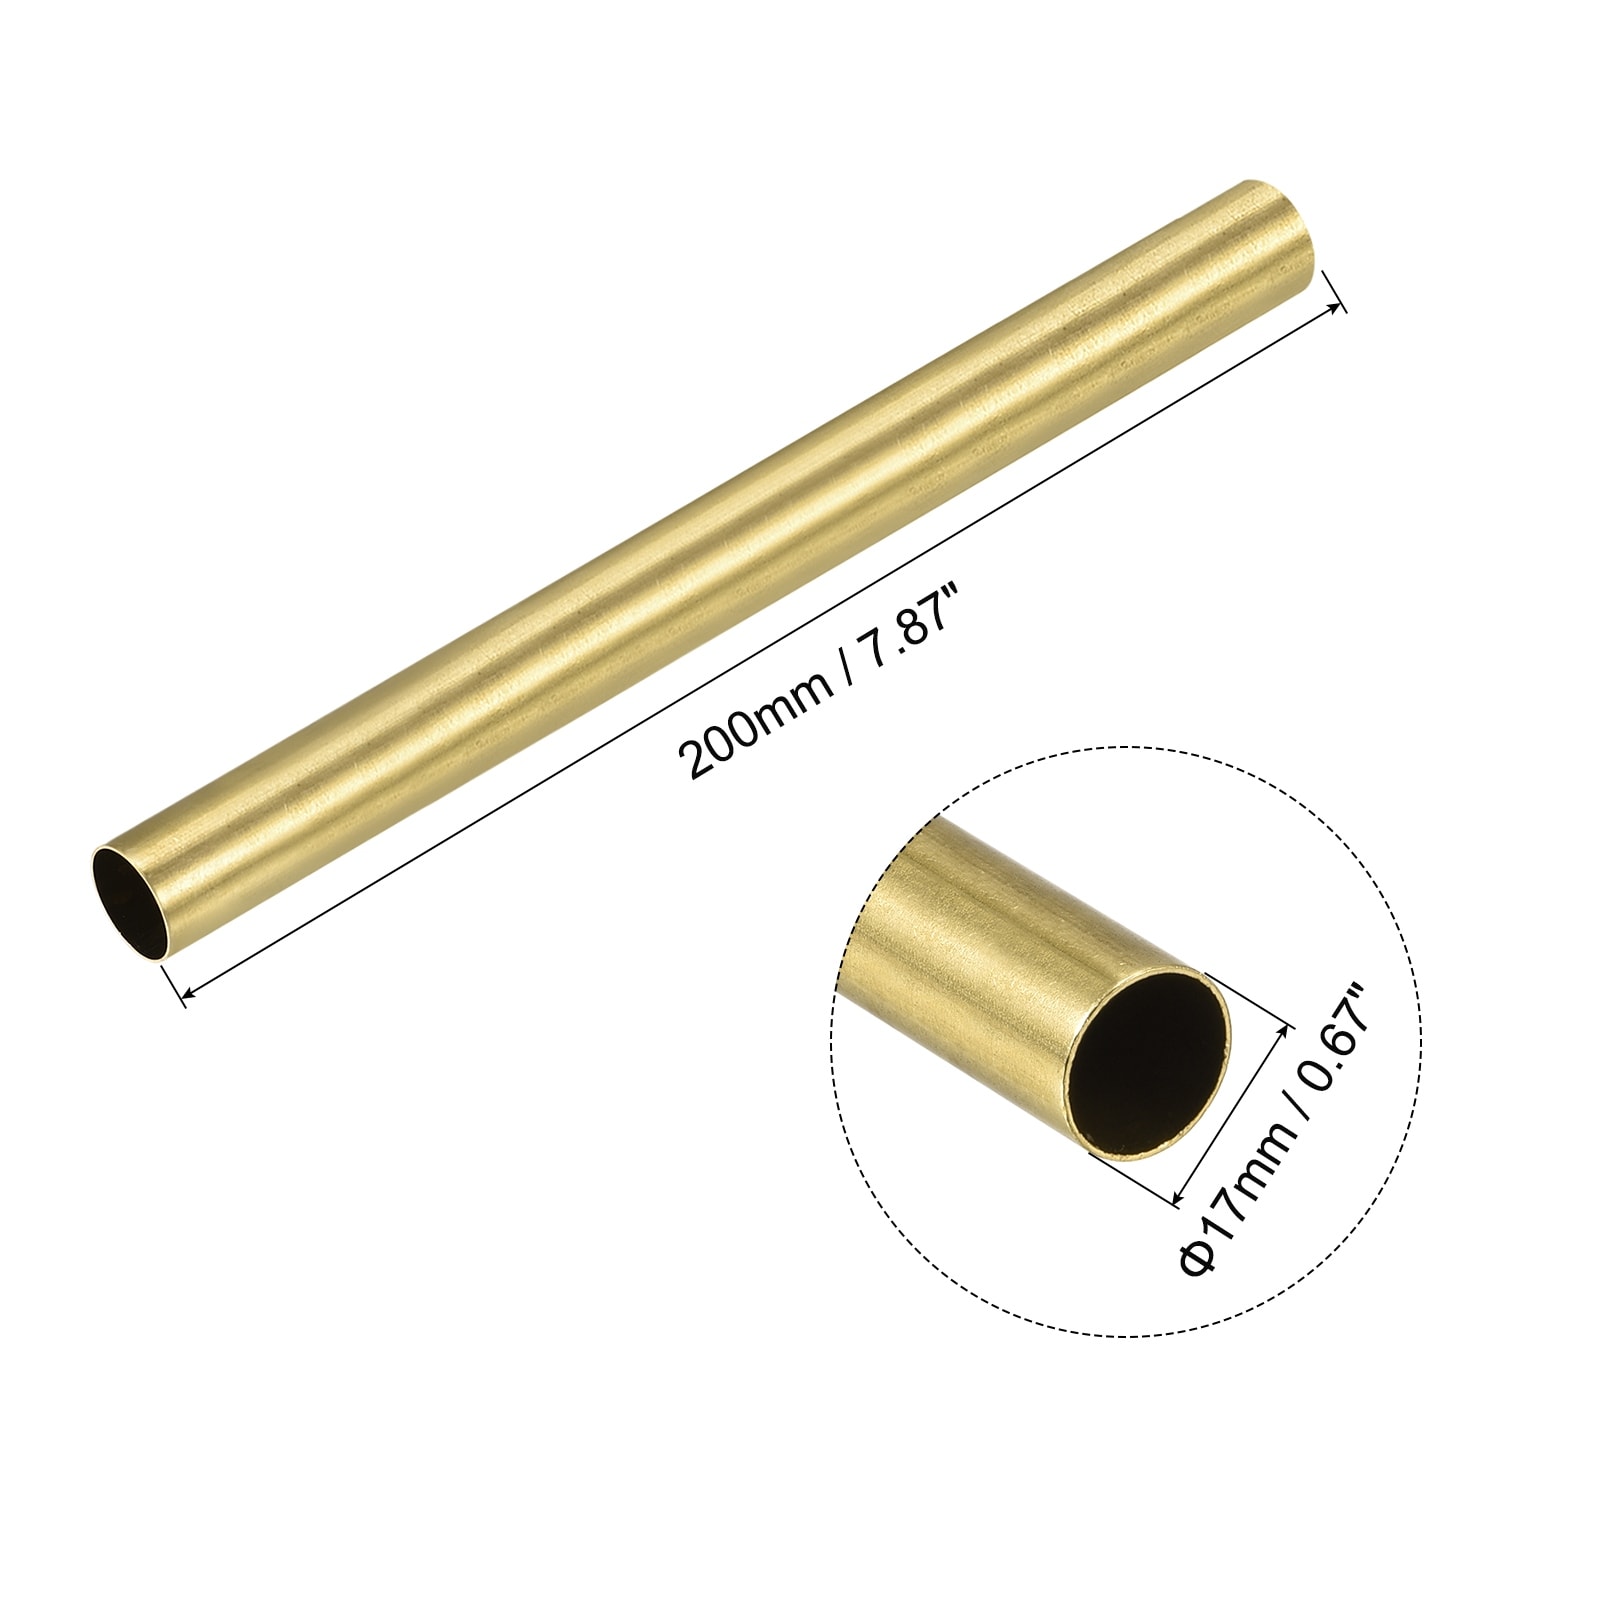 https://ak1.ostkcdn.com/images/products/is/images/direct/88c6232d8c56e5487f7e4bc6879b69edd382a2e7/Brass-Round-Tube-17mm-OD-0.5mm-Wall-Thickness-200mm-Length-Pipe-Tubing.jpg